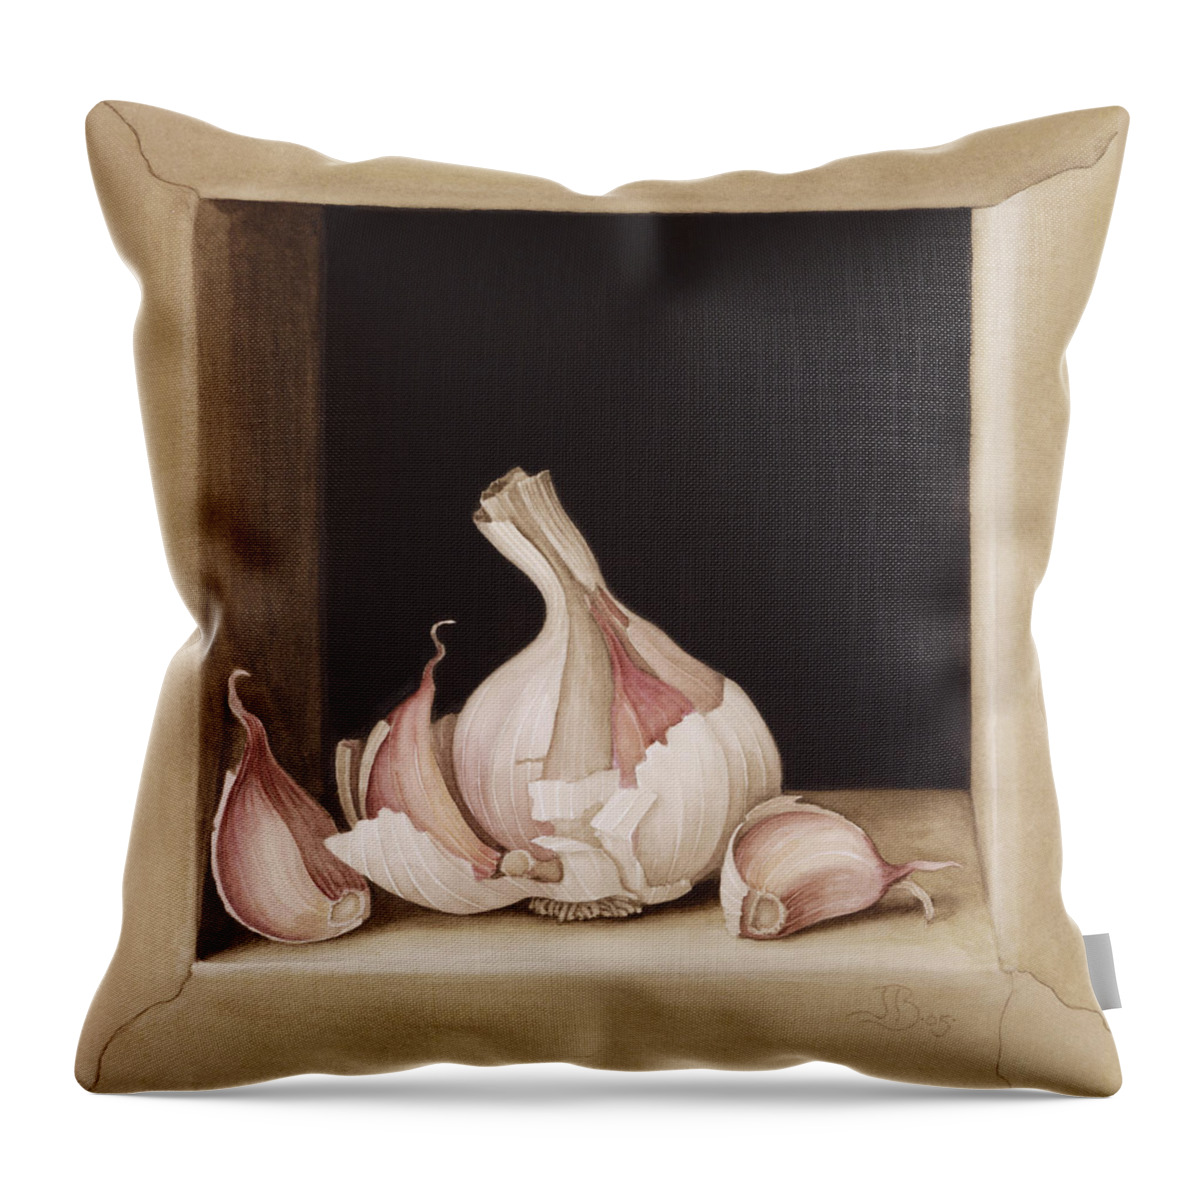 Clove; Cloves; Bulb; Food; Ingredient; Still Life; Culinary; Ledge; Onion Throw Pillow featuring the painting Garlic by Jenny Barron